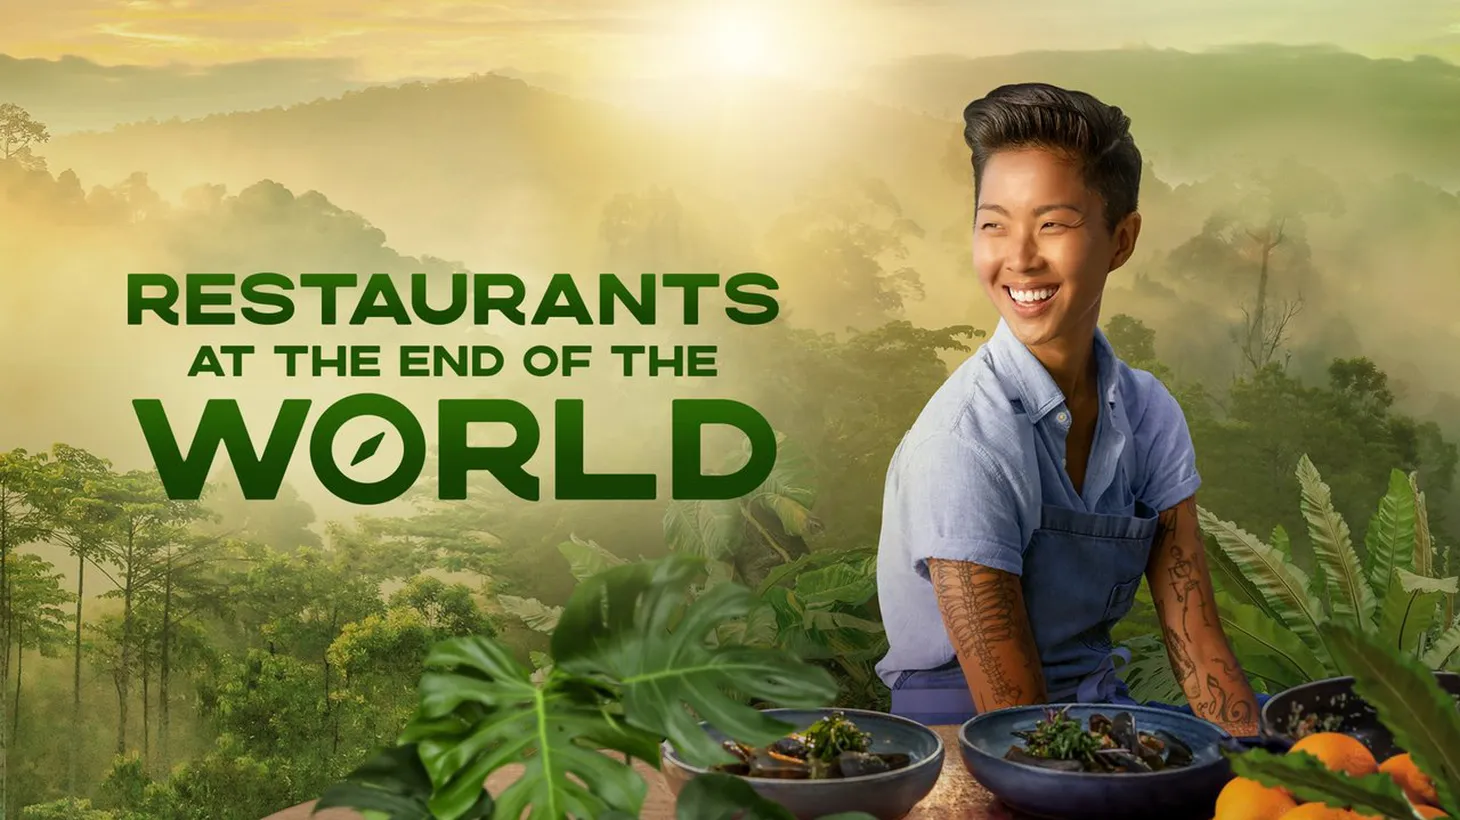 Check out what it’s like running a restaurant in the rain forest — in Kristen Kish’s series “Restaurants at the End of the World.”